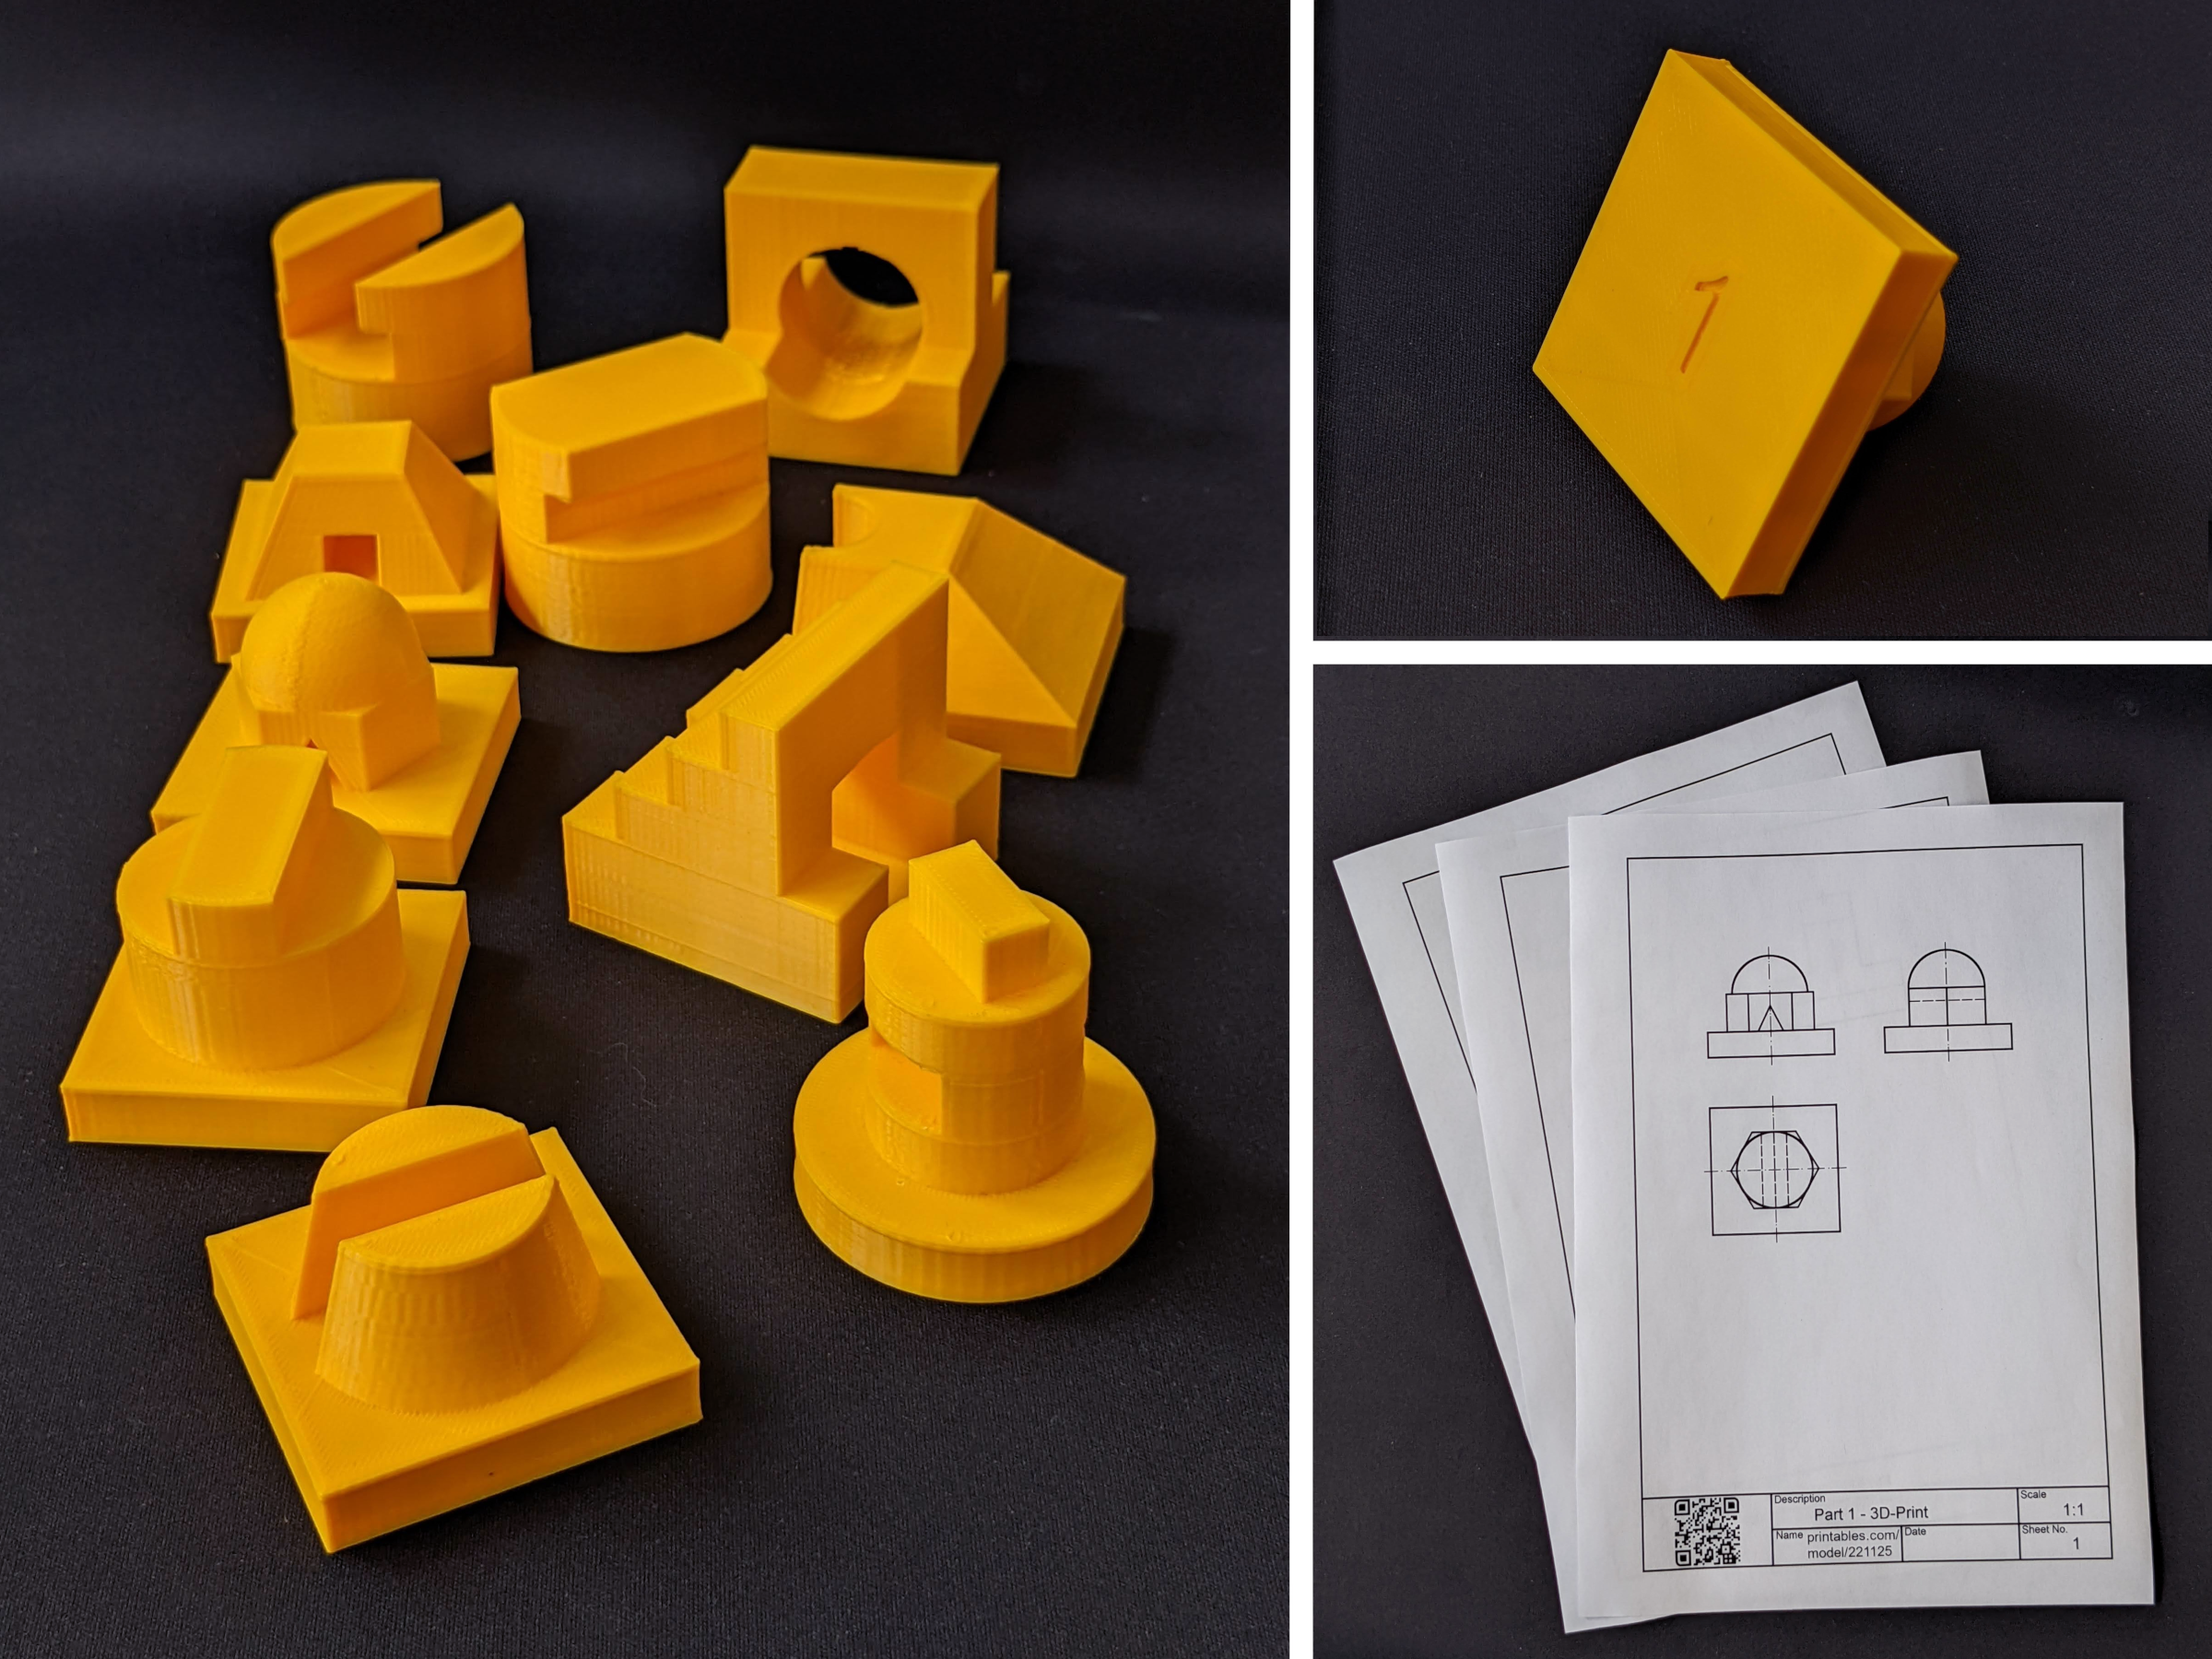 Technical drawings with 3D-Printed forms